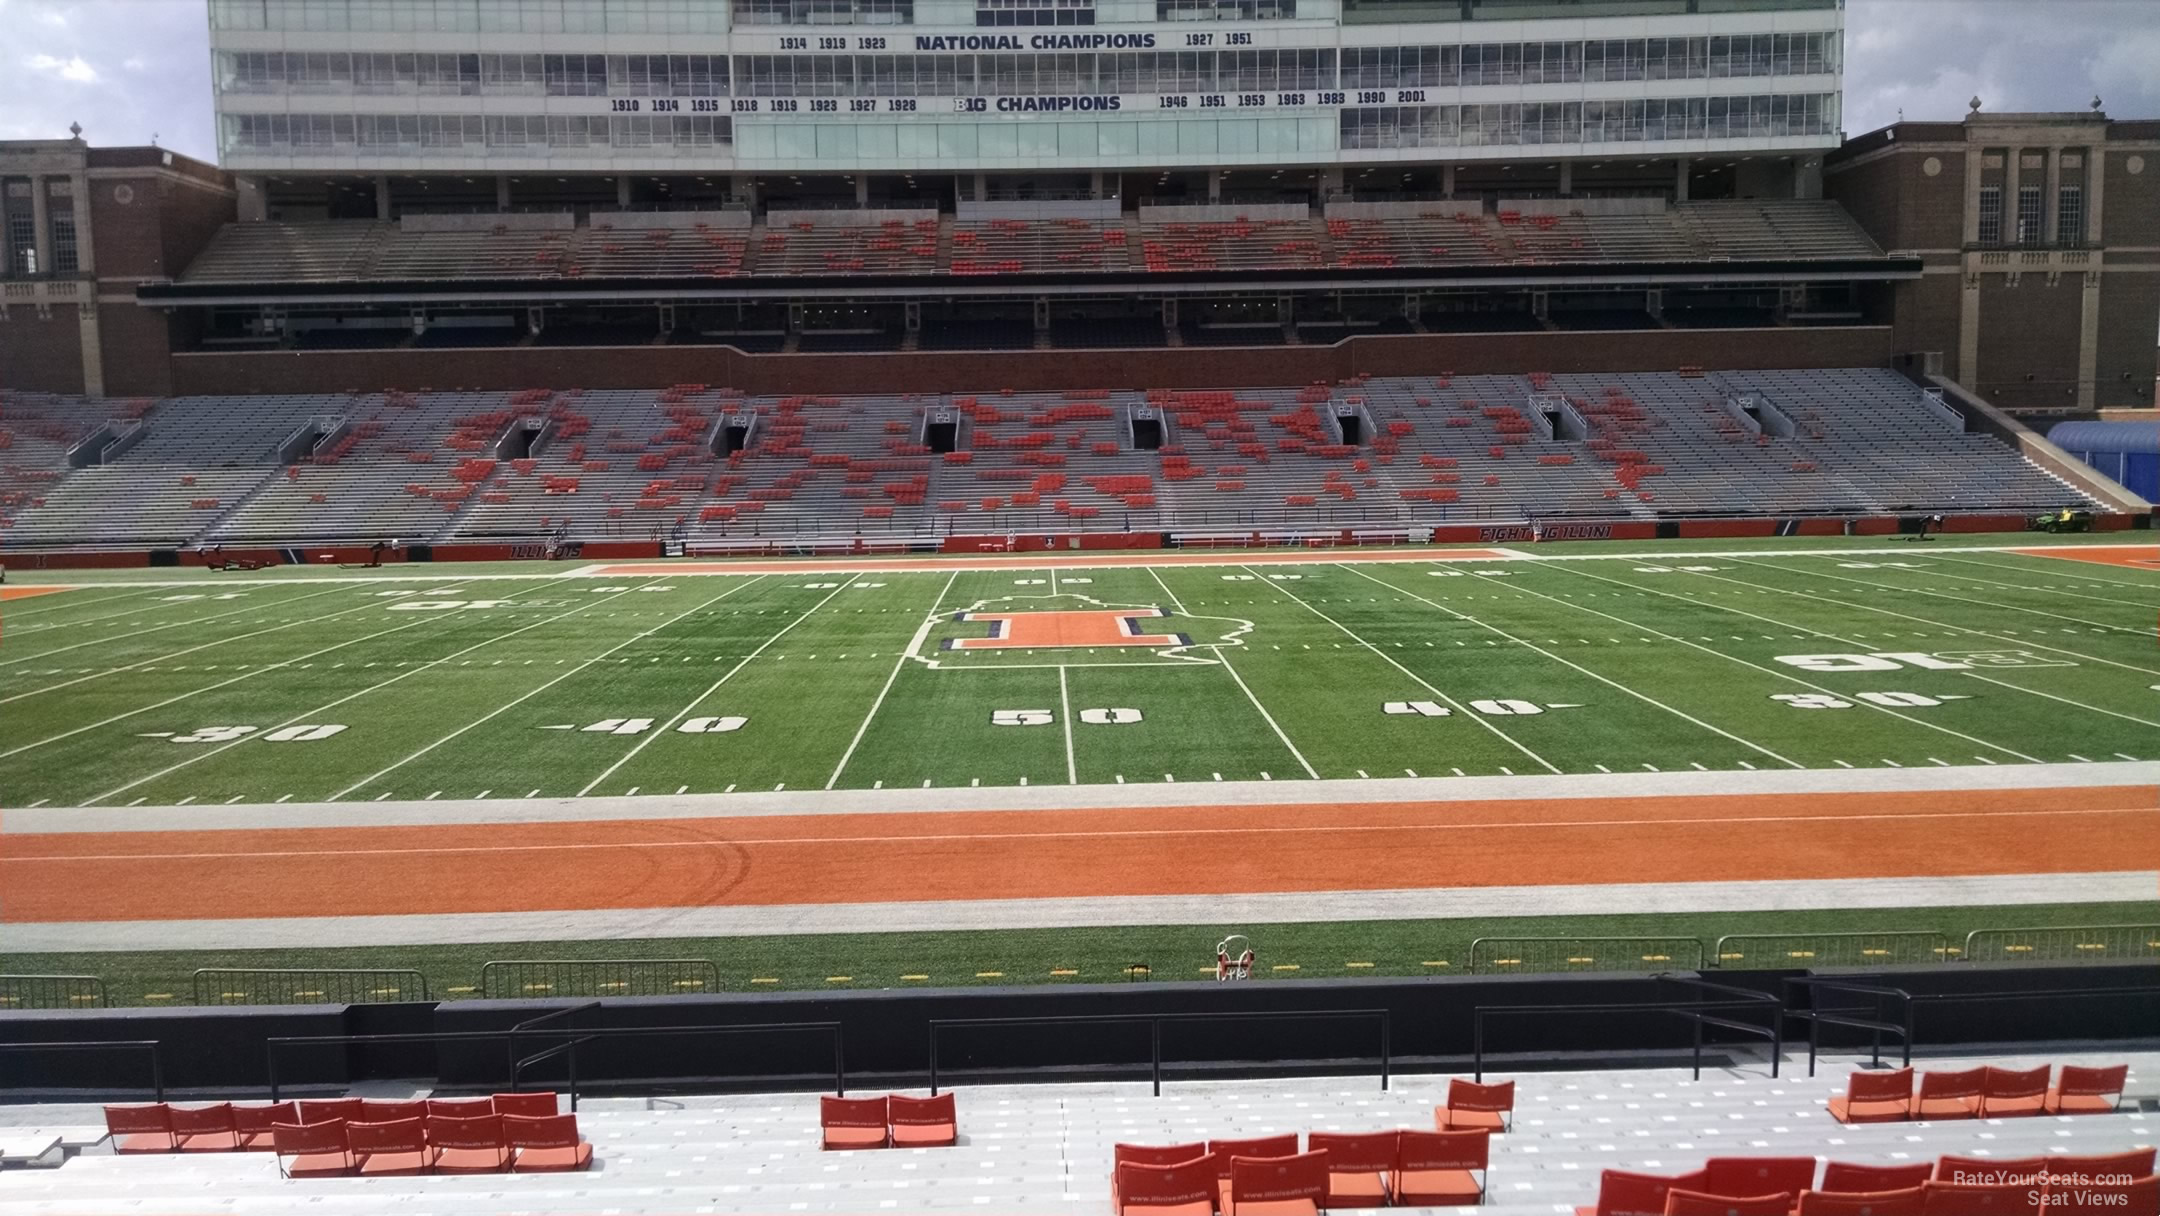 Memorial Stadium Champaign Seating Chart With Rows